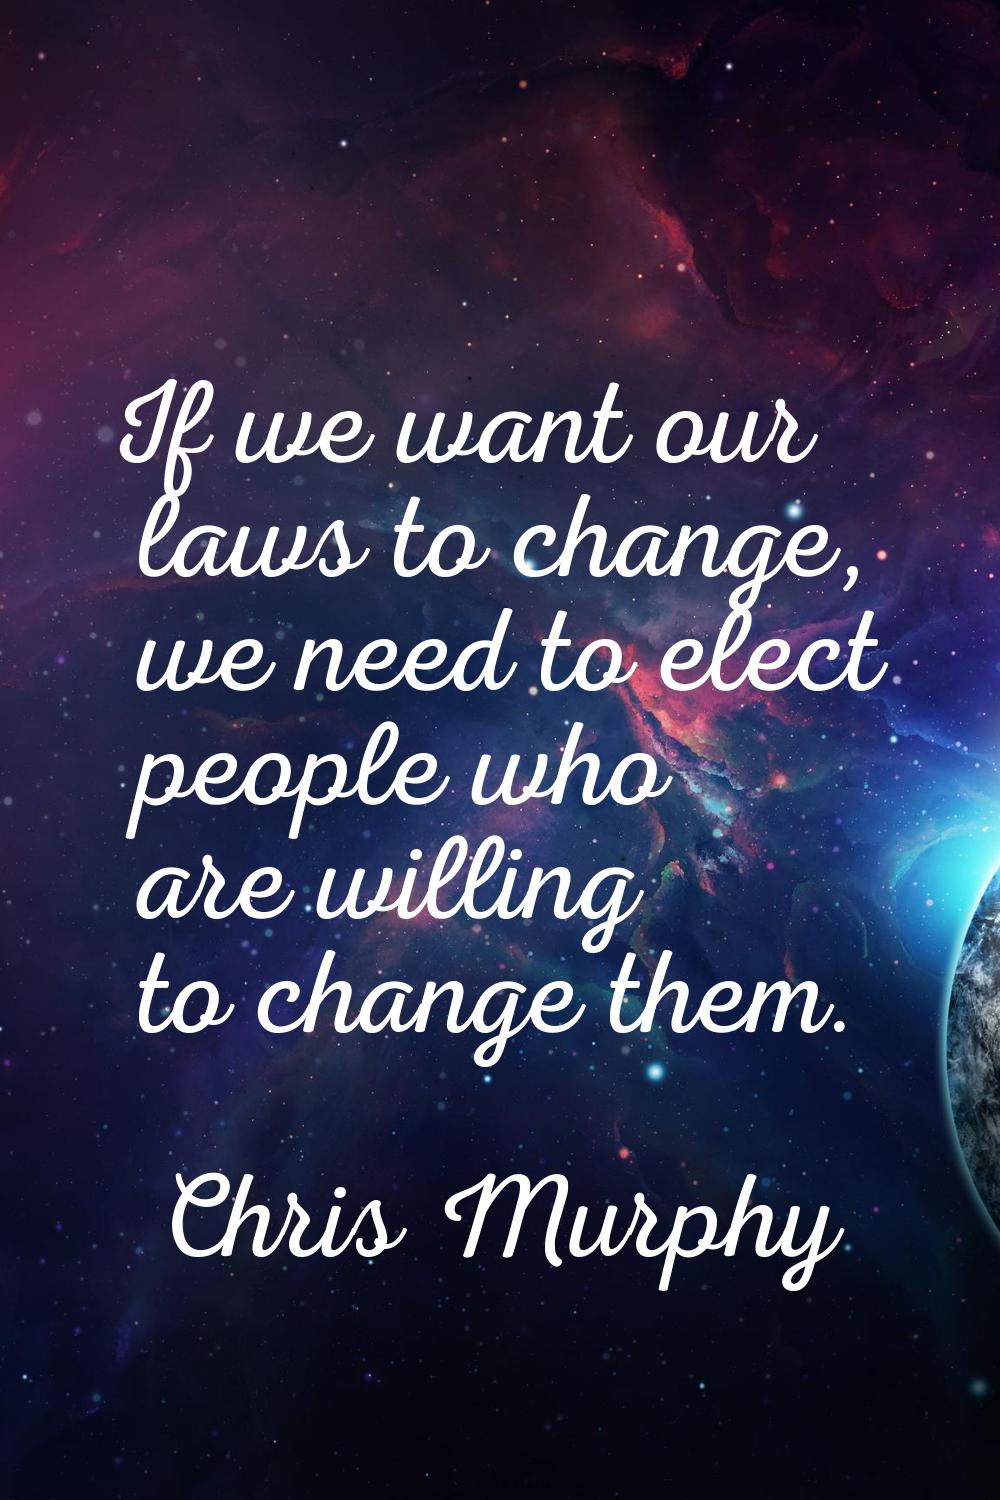 If we want our laws to change, we need to elect people who are willing to change them.